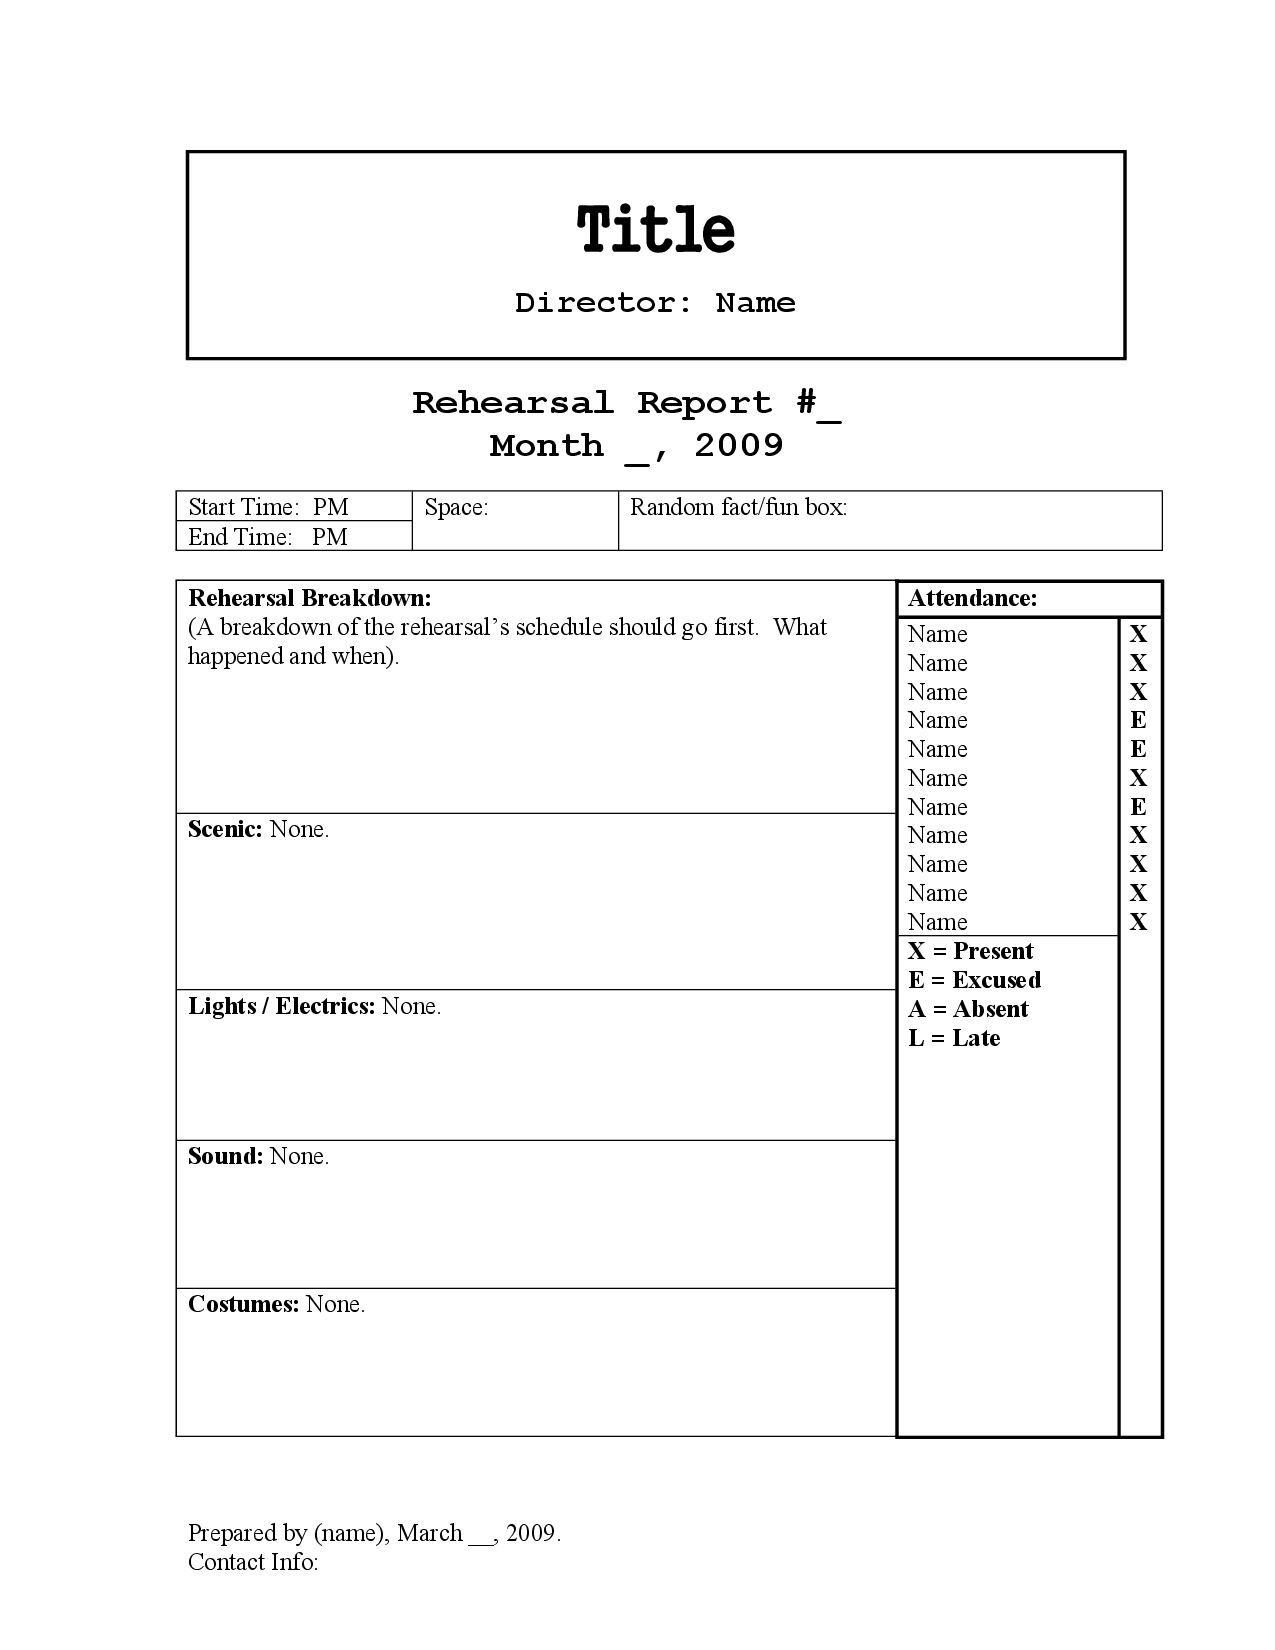 Rehearsal Report Template  Stage Manager In   Project with regard to Rehearsal Report Template